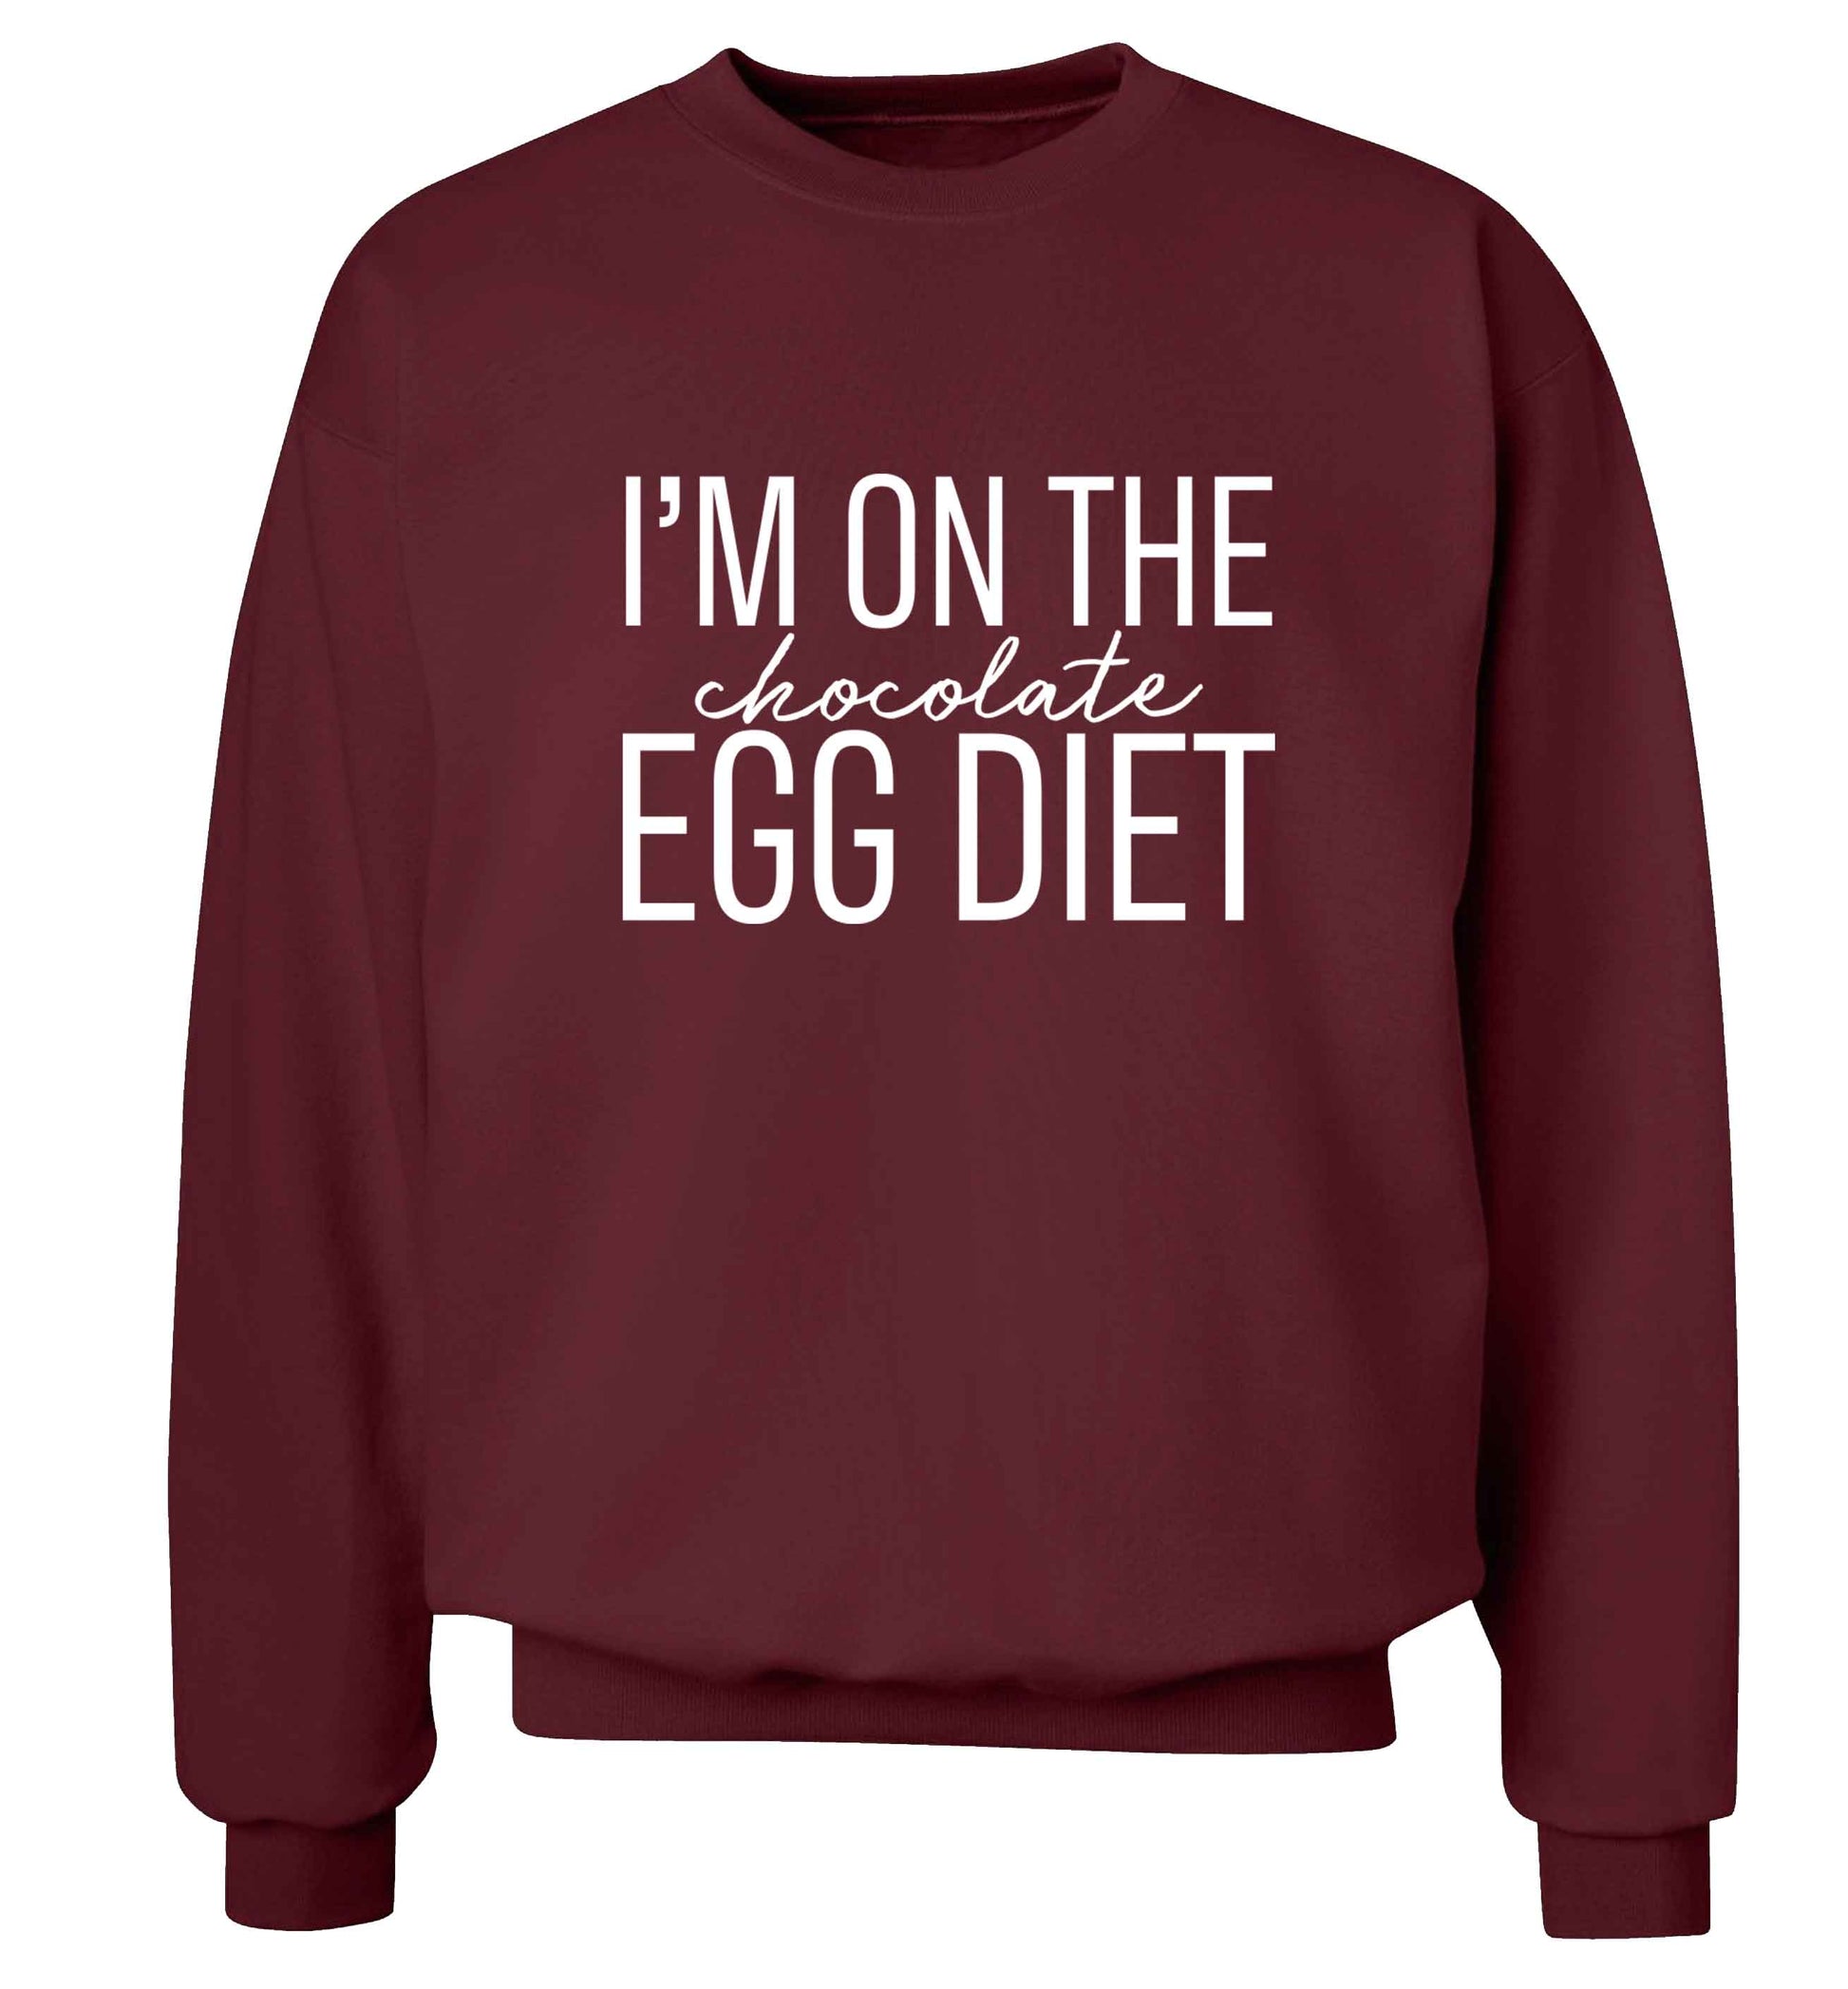 I'm on the chocolate egg diet adult's unisex maroon sweater 2XL